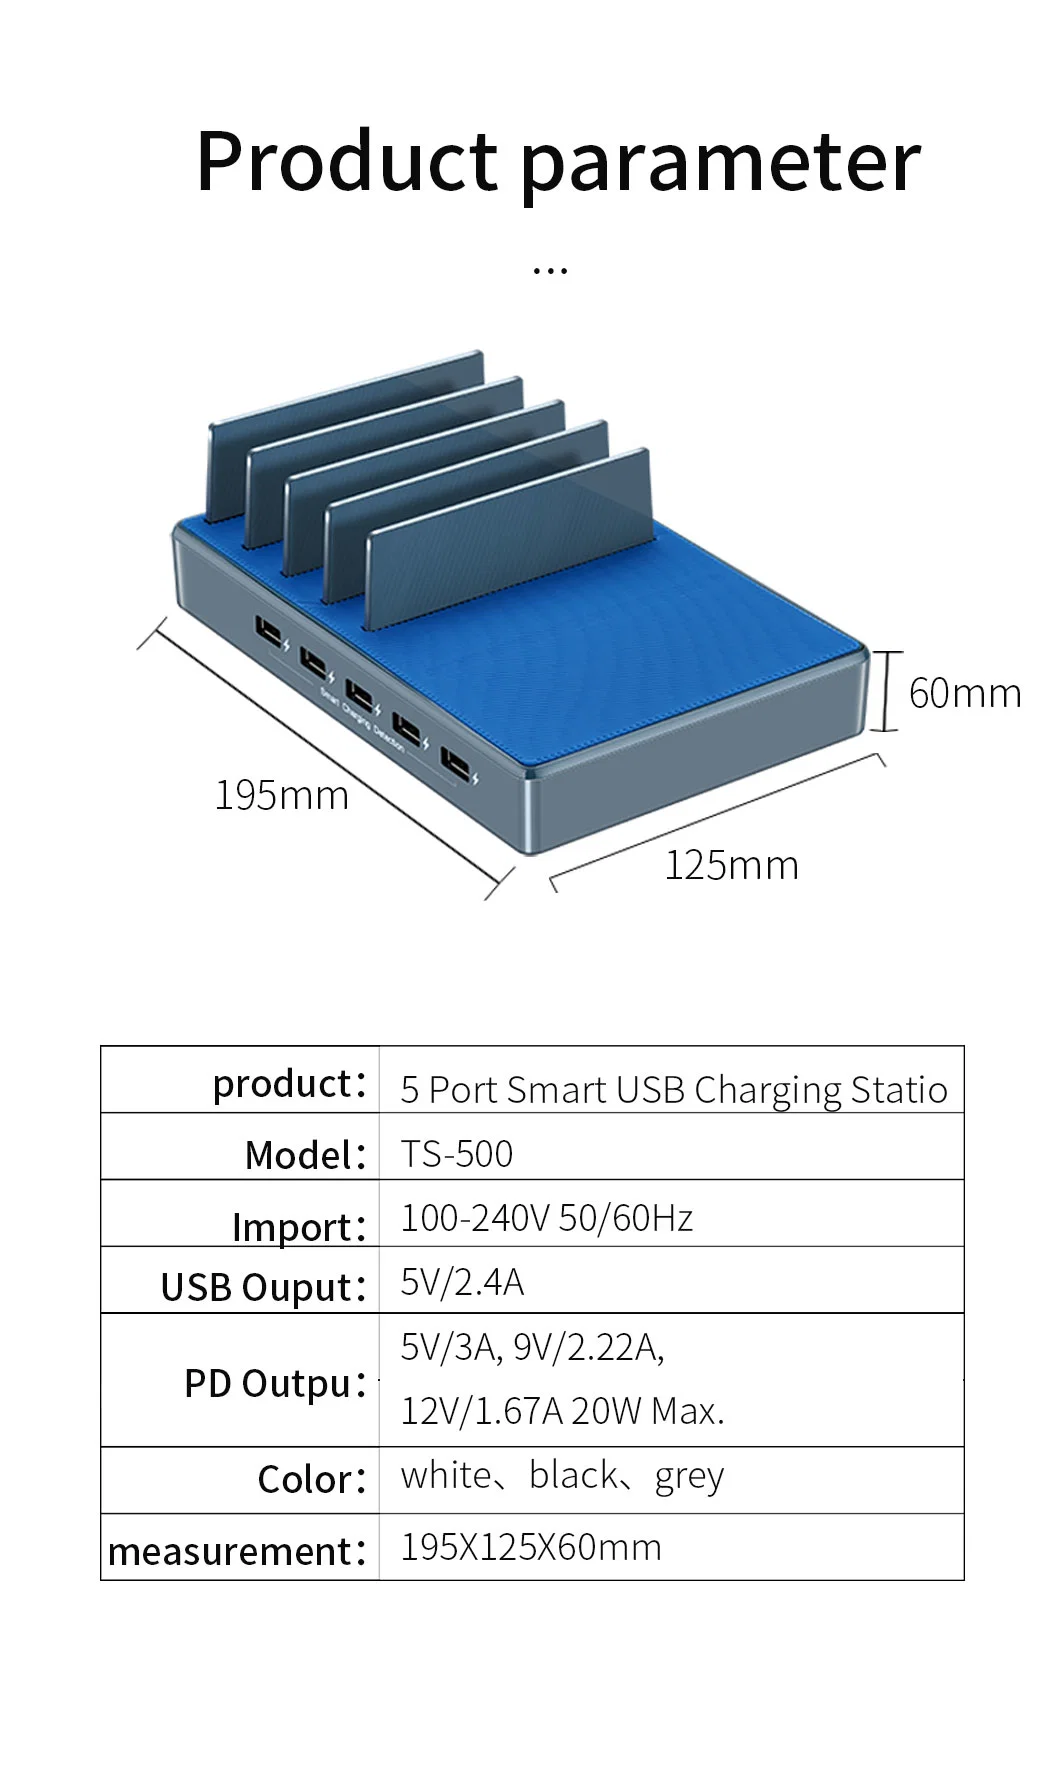 High-Speed 12W Charging for Single Device